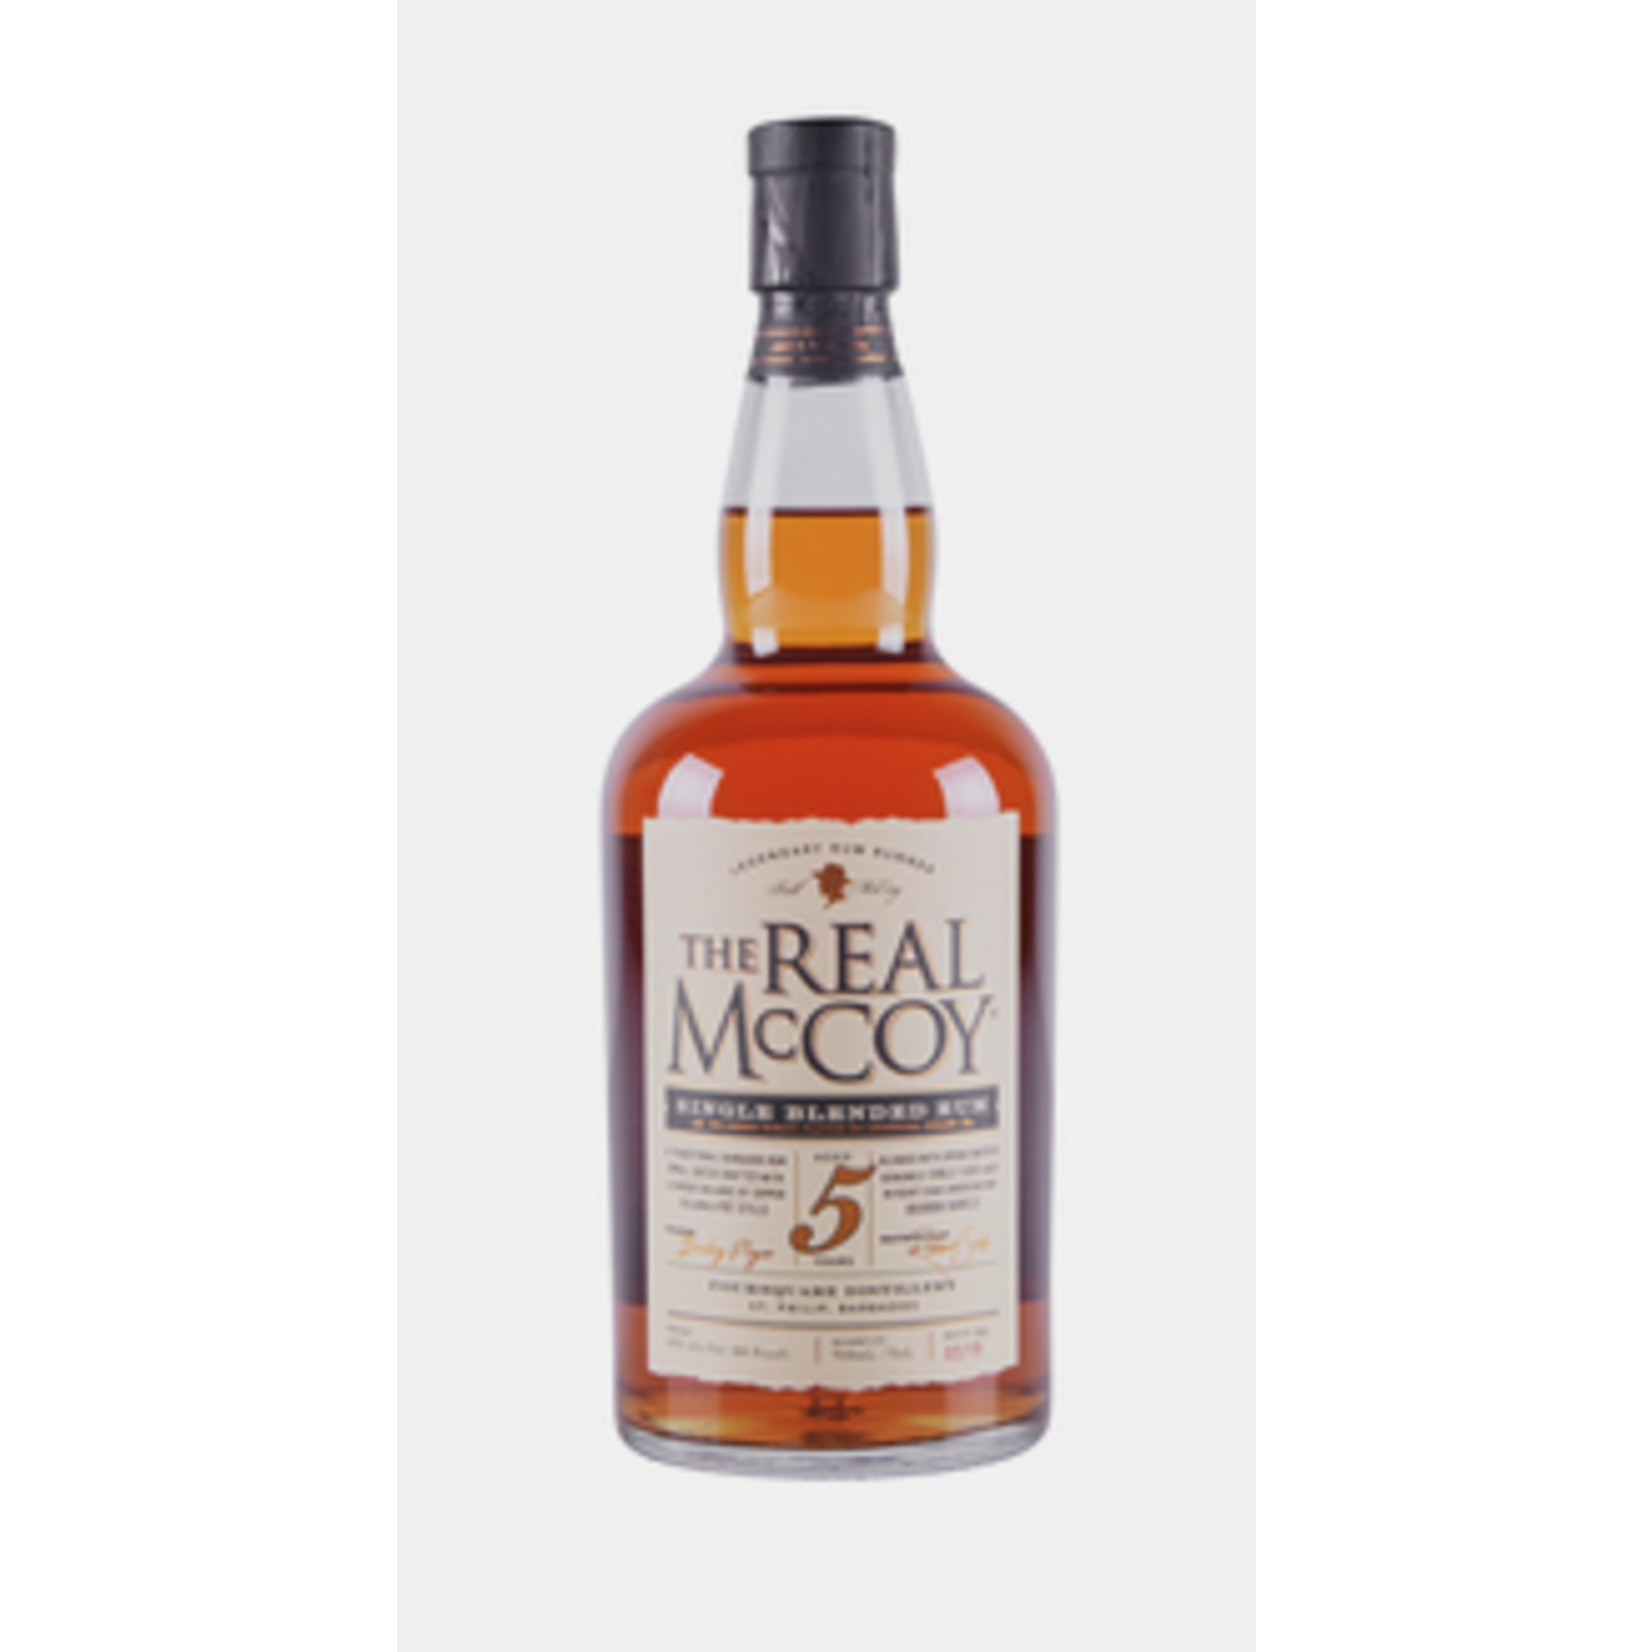 Spirits The Real McCoy Single Blended Rum 5 Years